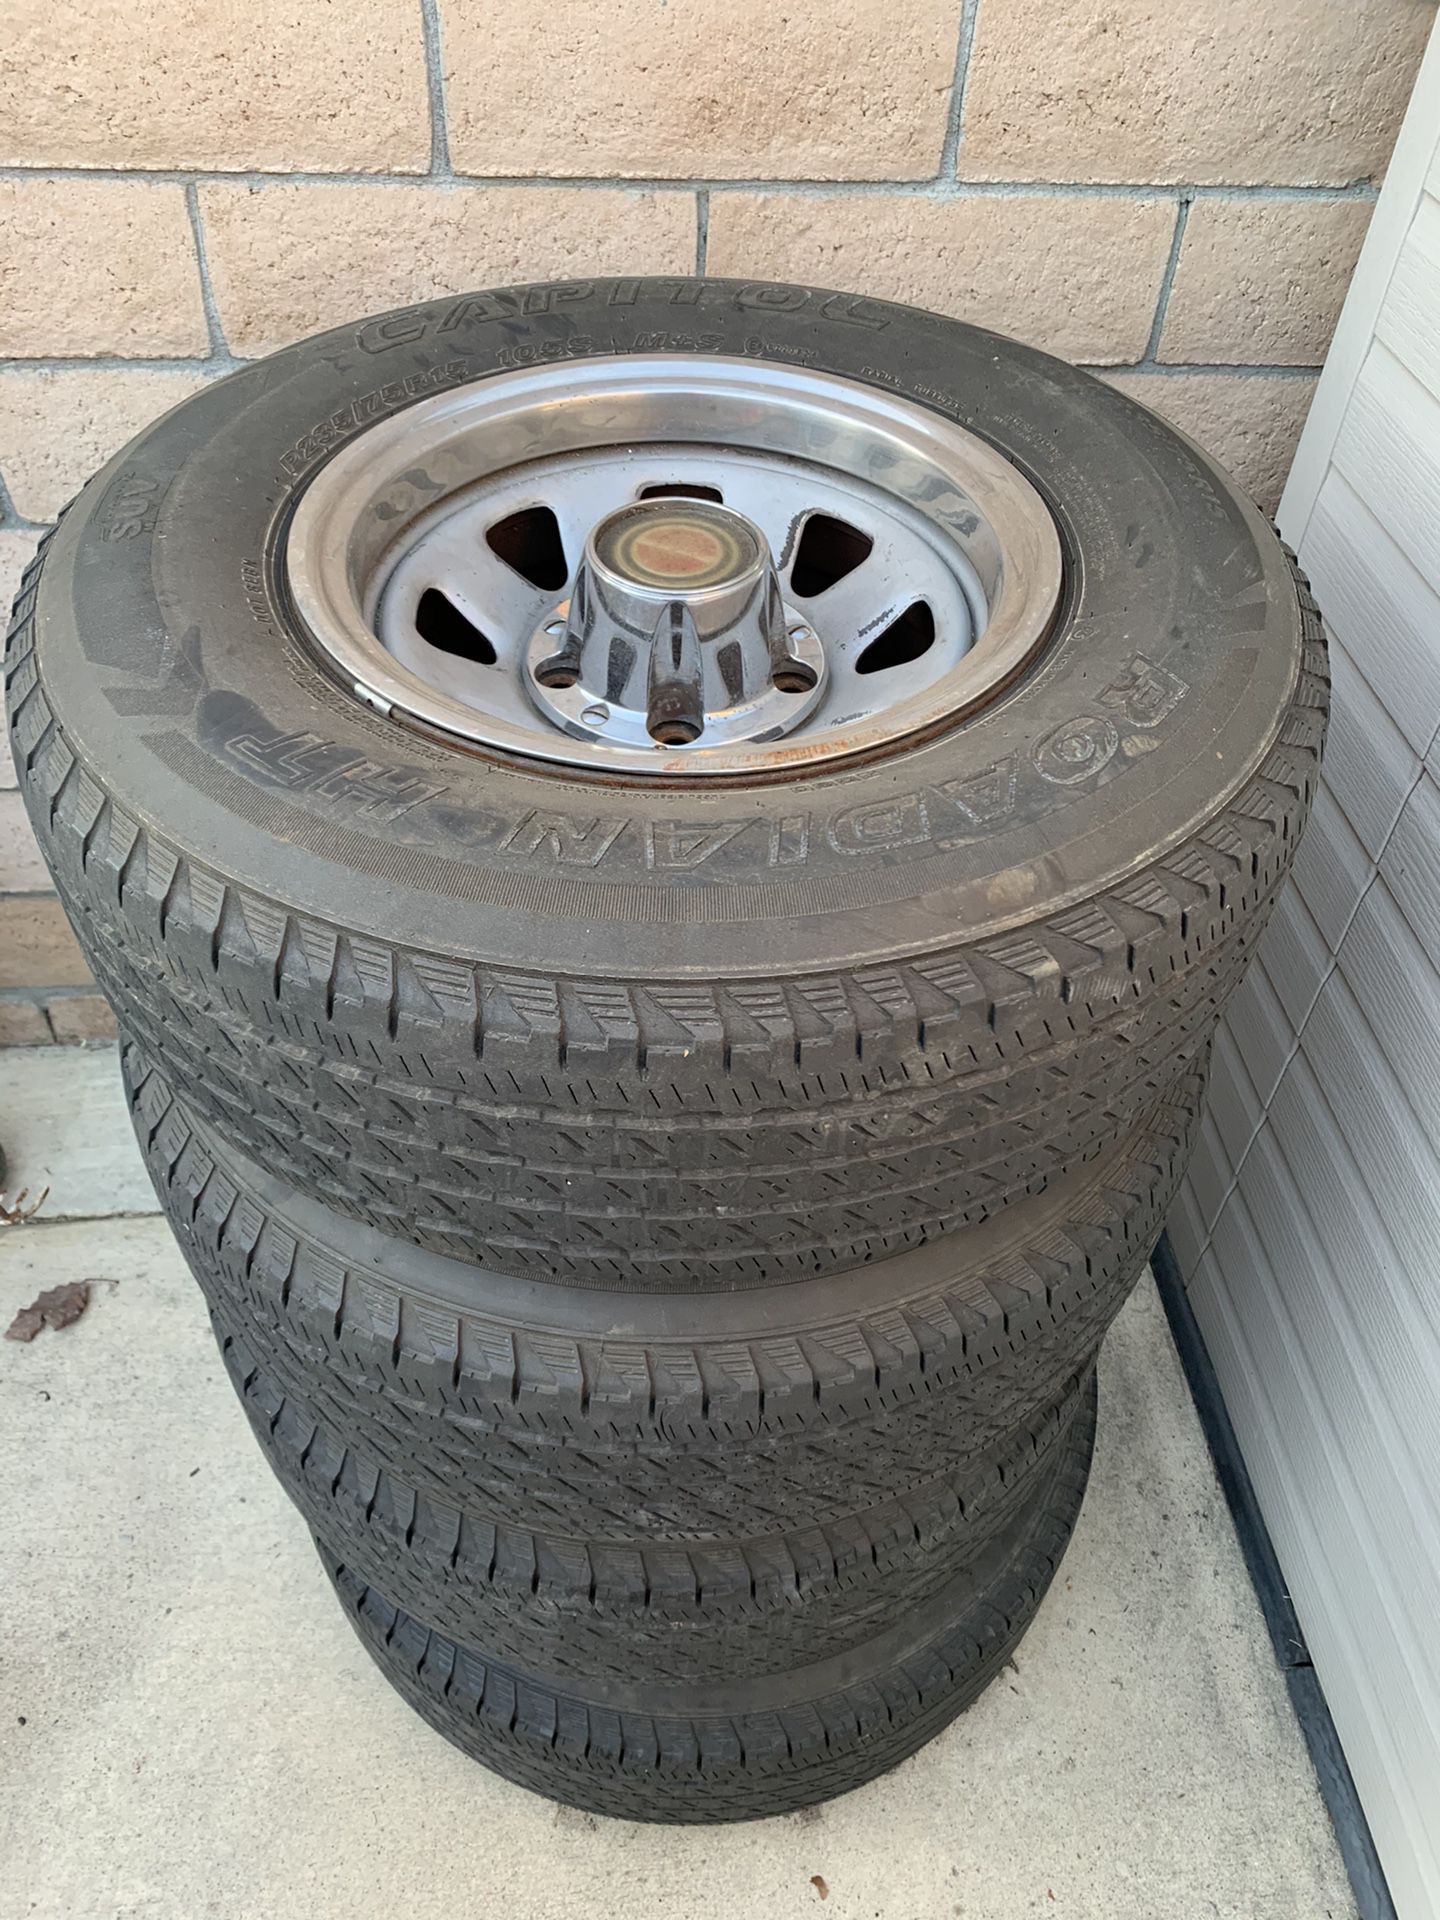 Ford Bronco Wheels and Tires 31x10.5x15 fit F150 Dodge Jeep